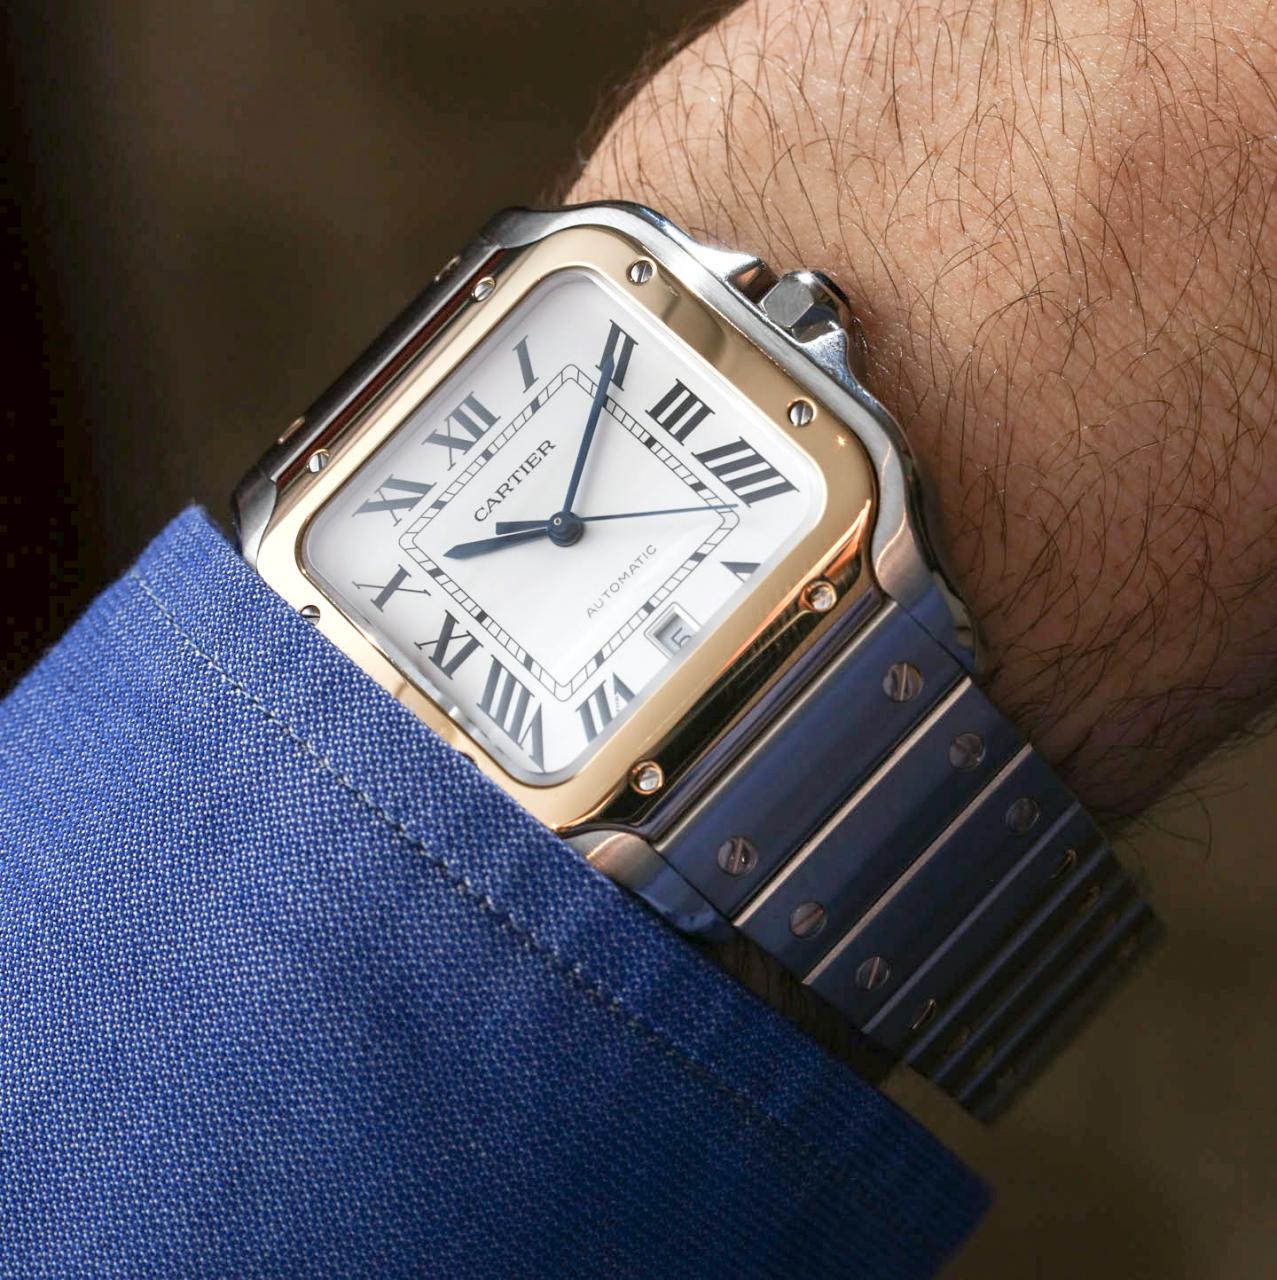 Cartier Santos Watches For 2018 Will Be A Hit With Buyers - Swiss AP ...